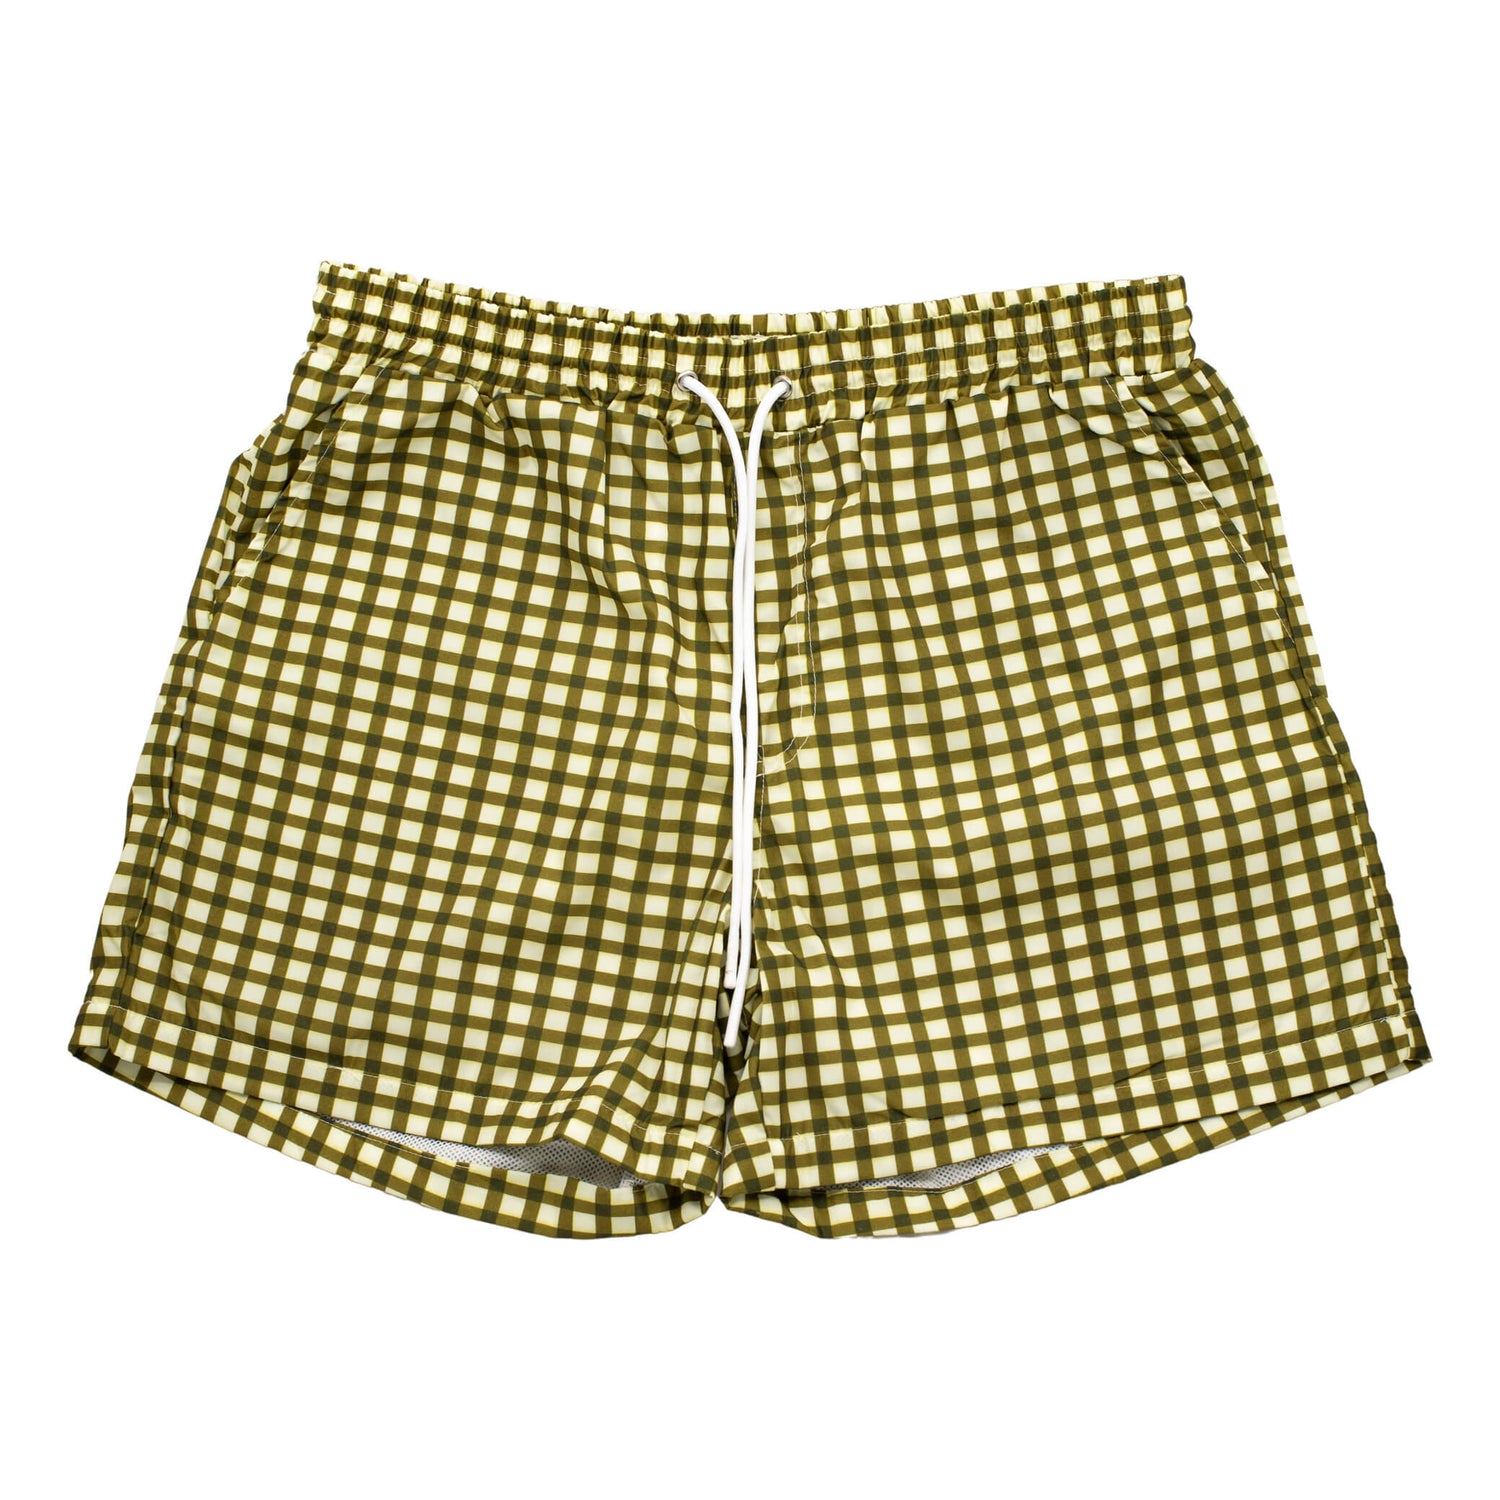 Vibrant Hounds Green checkered swim shorts. This is front flay and the swimwear is green and cream checkers.